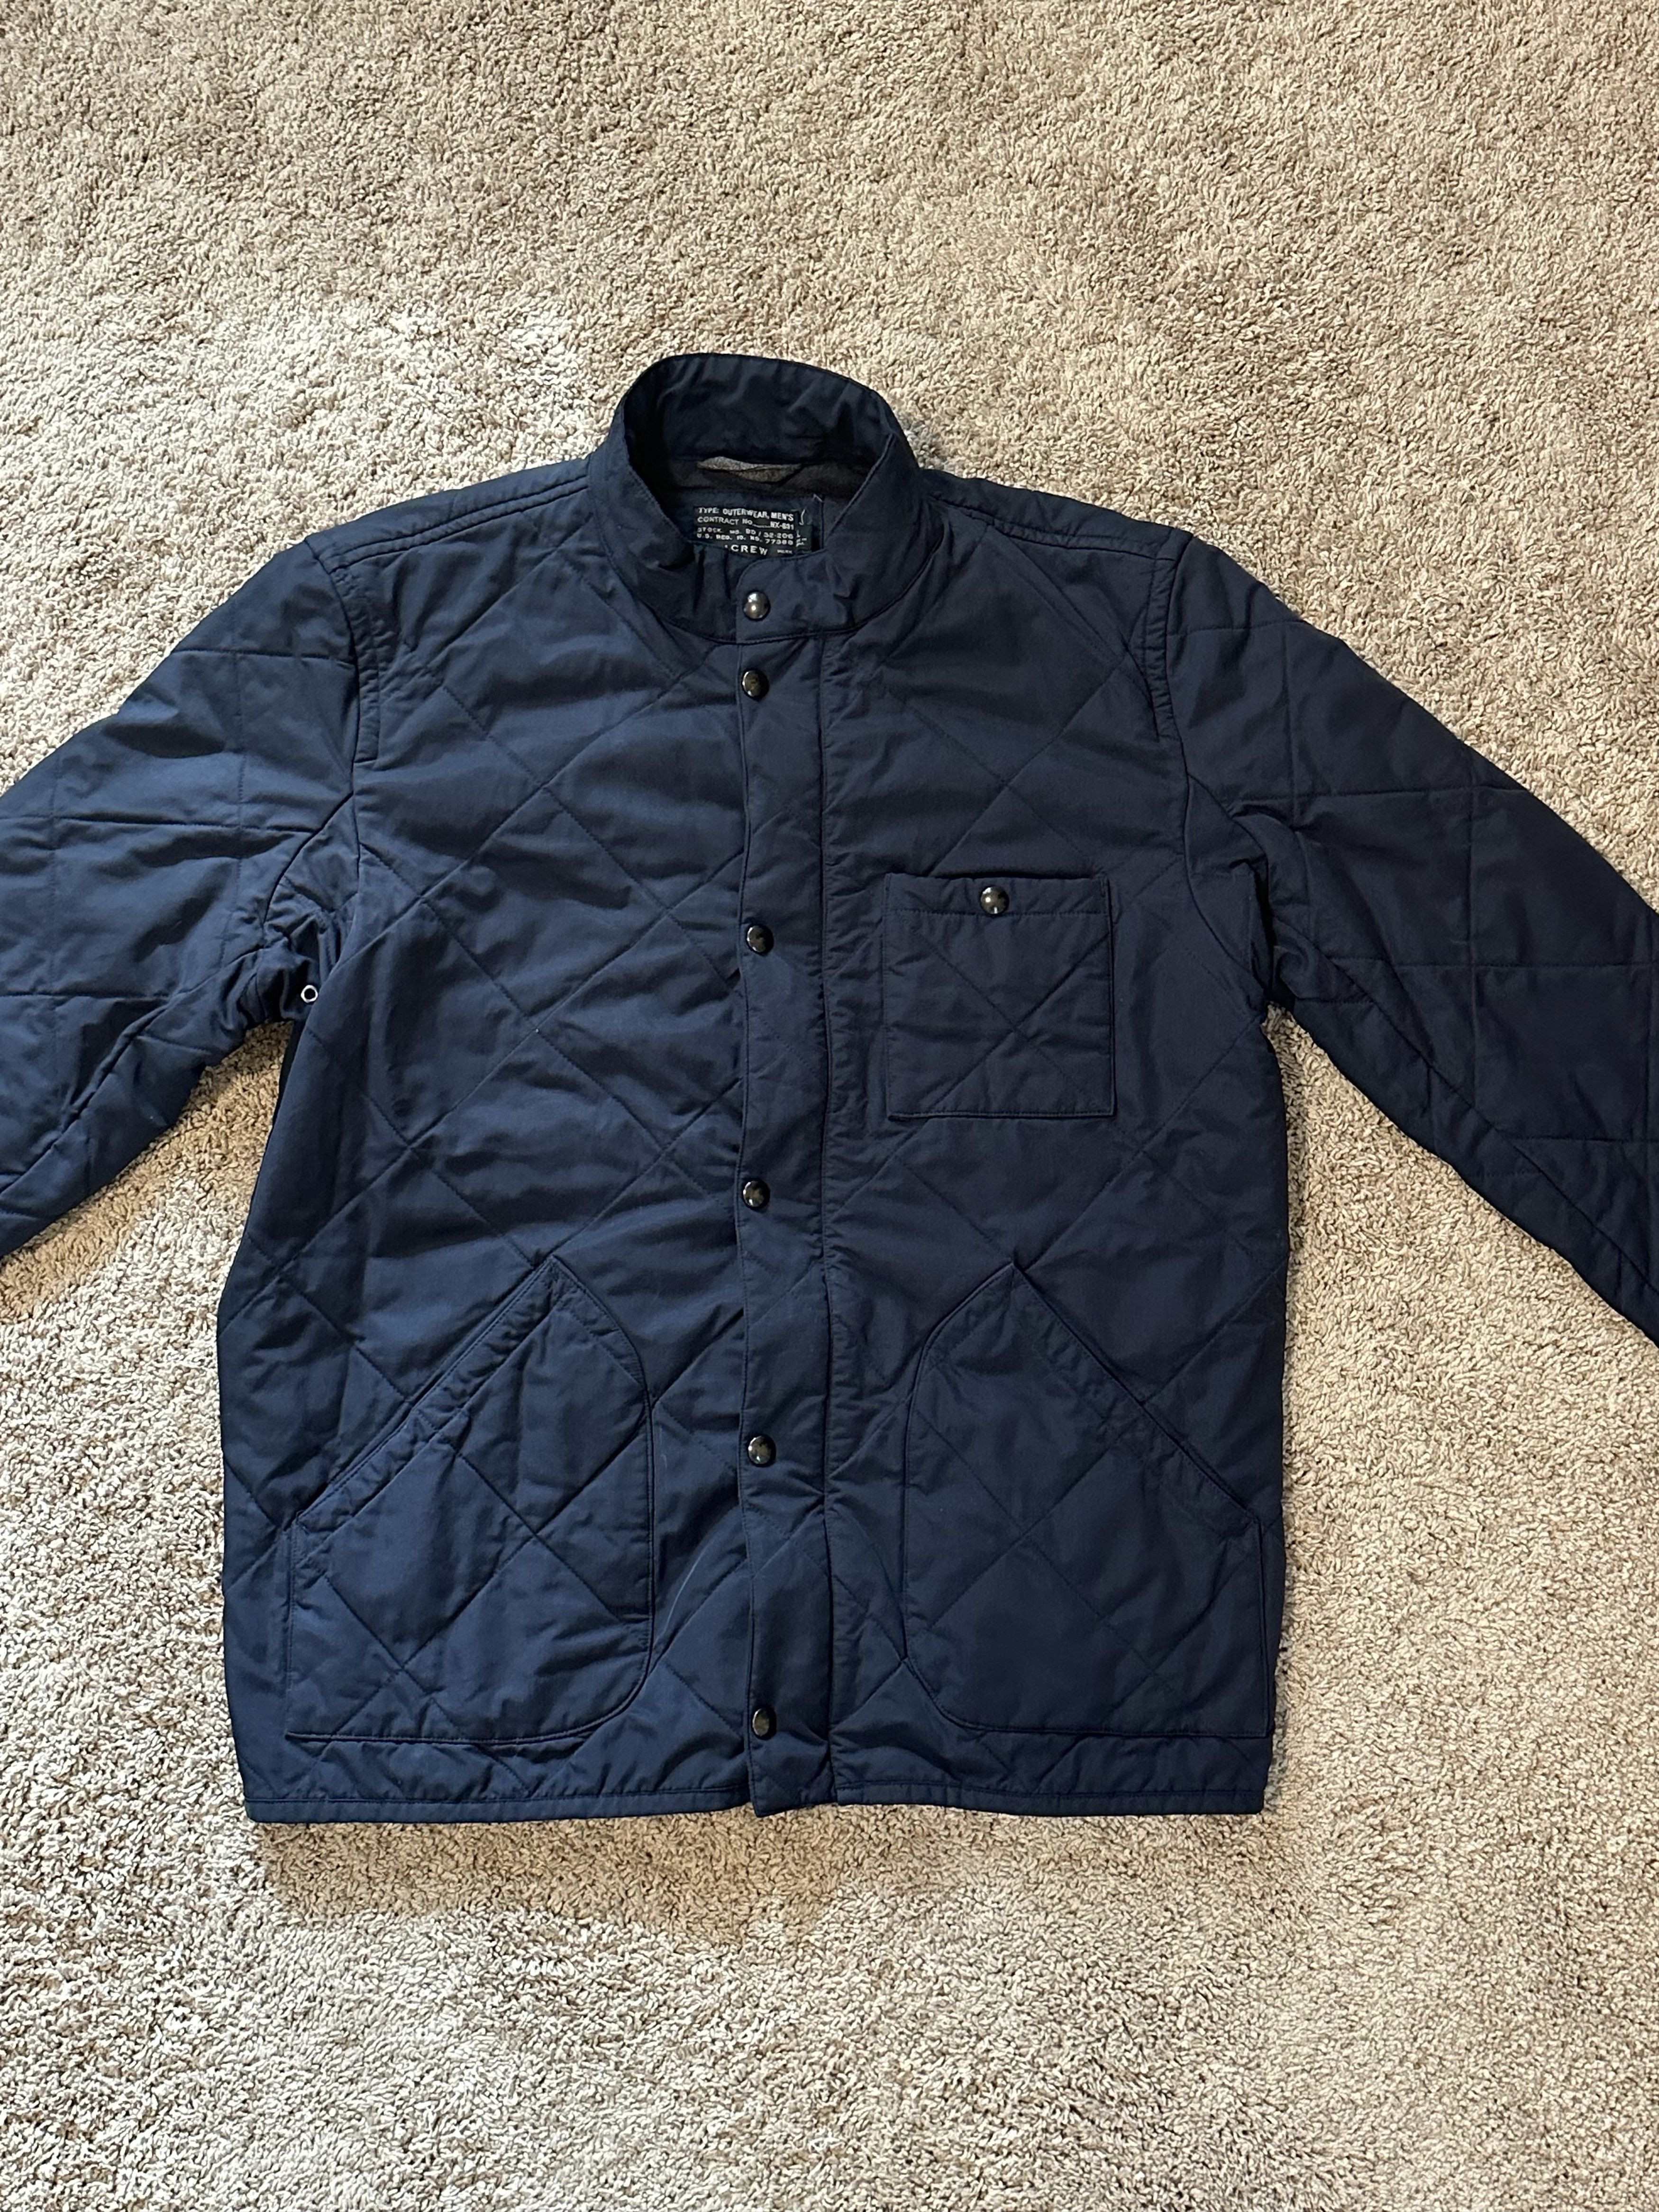 J.Crew Sussex Quilted Jacket Navy | Grailed